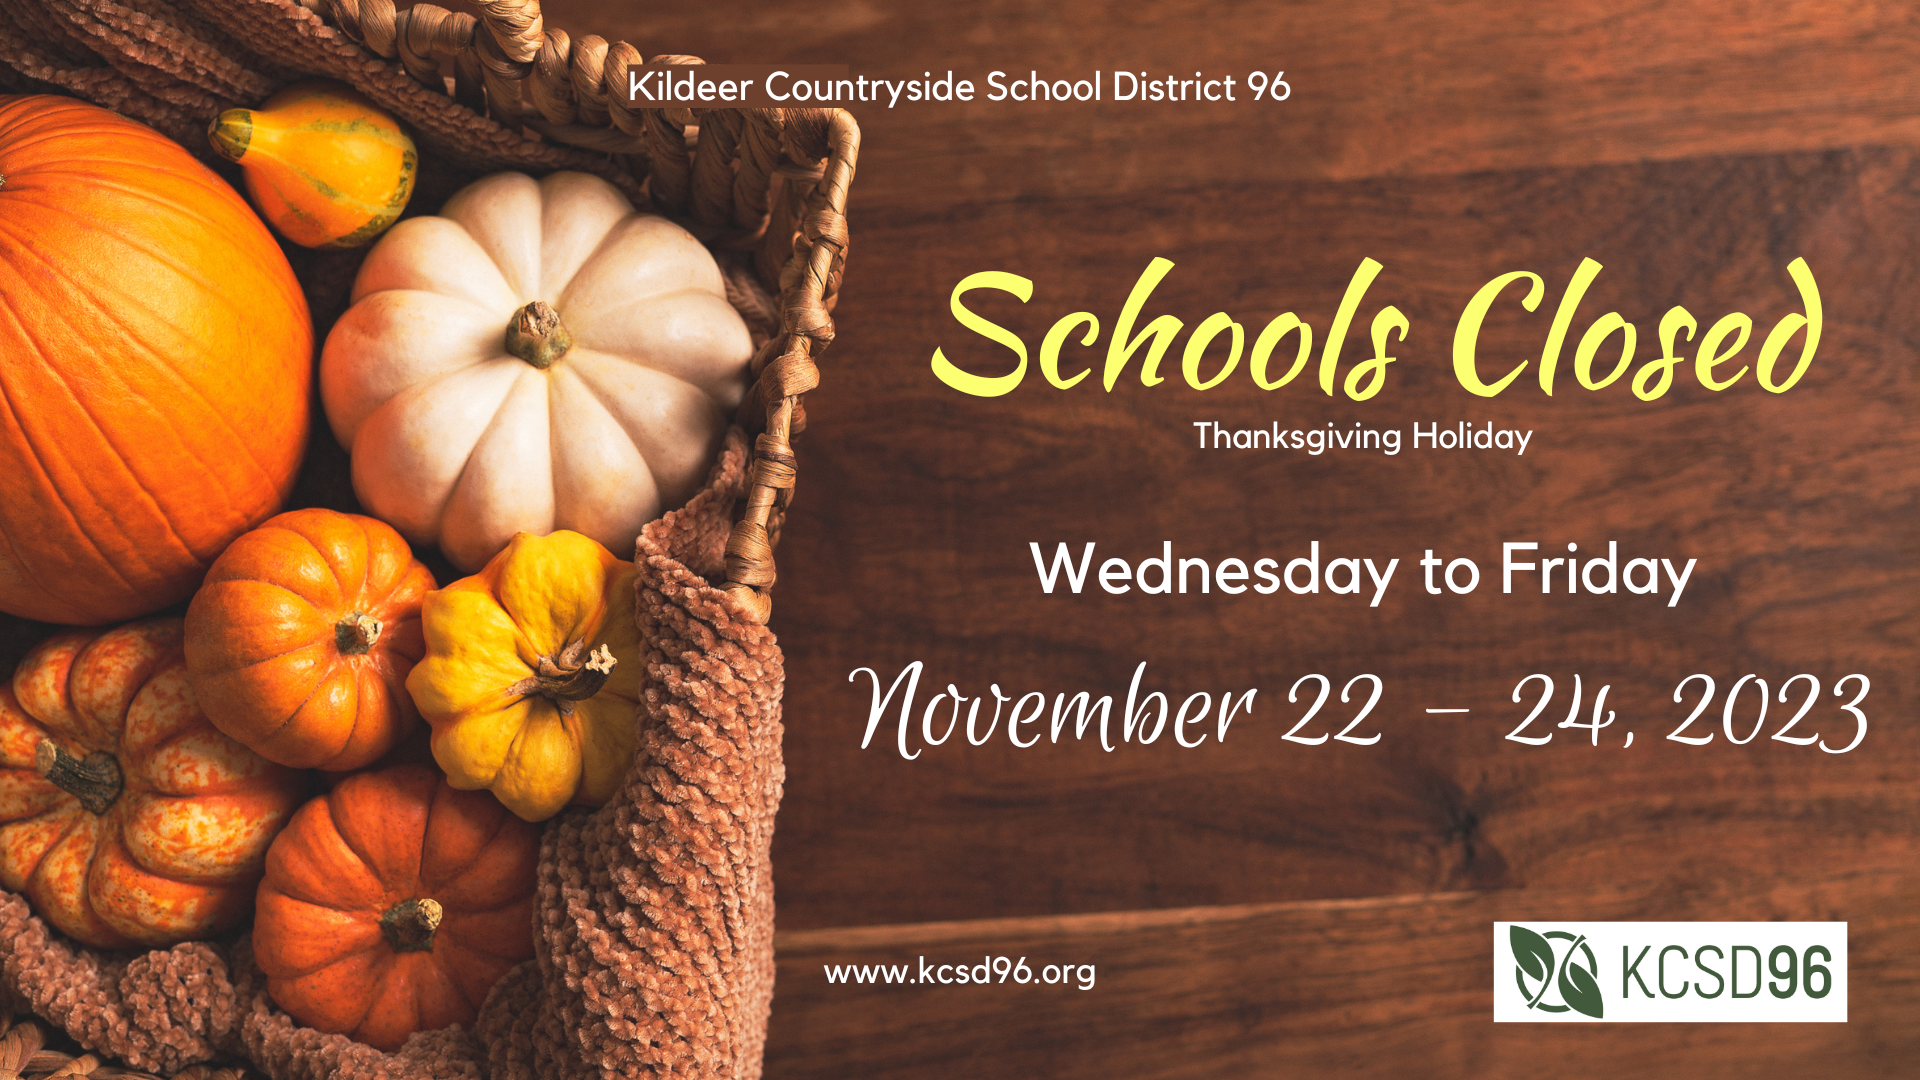 District 96 Schools Closed from November 22 to 24, 2023